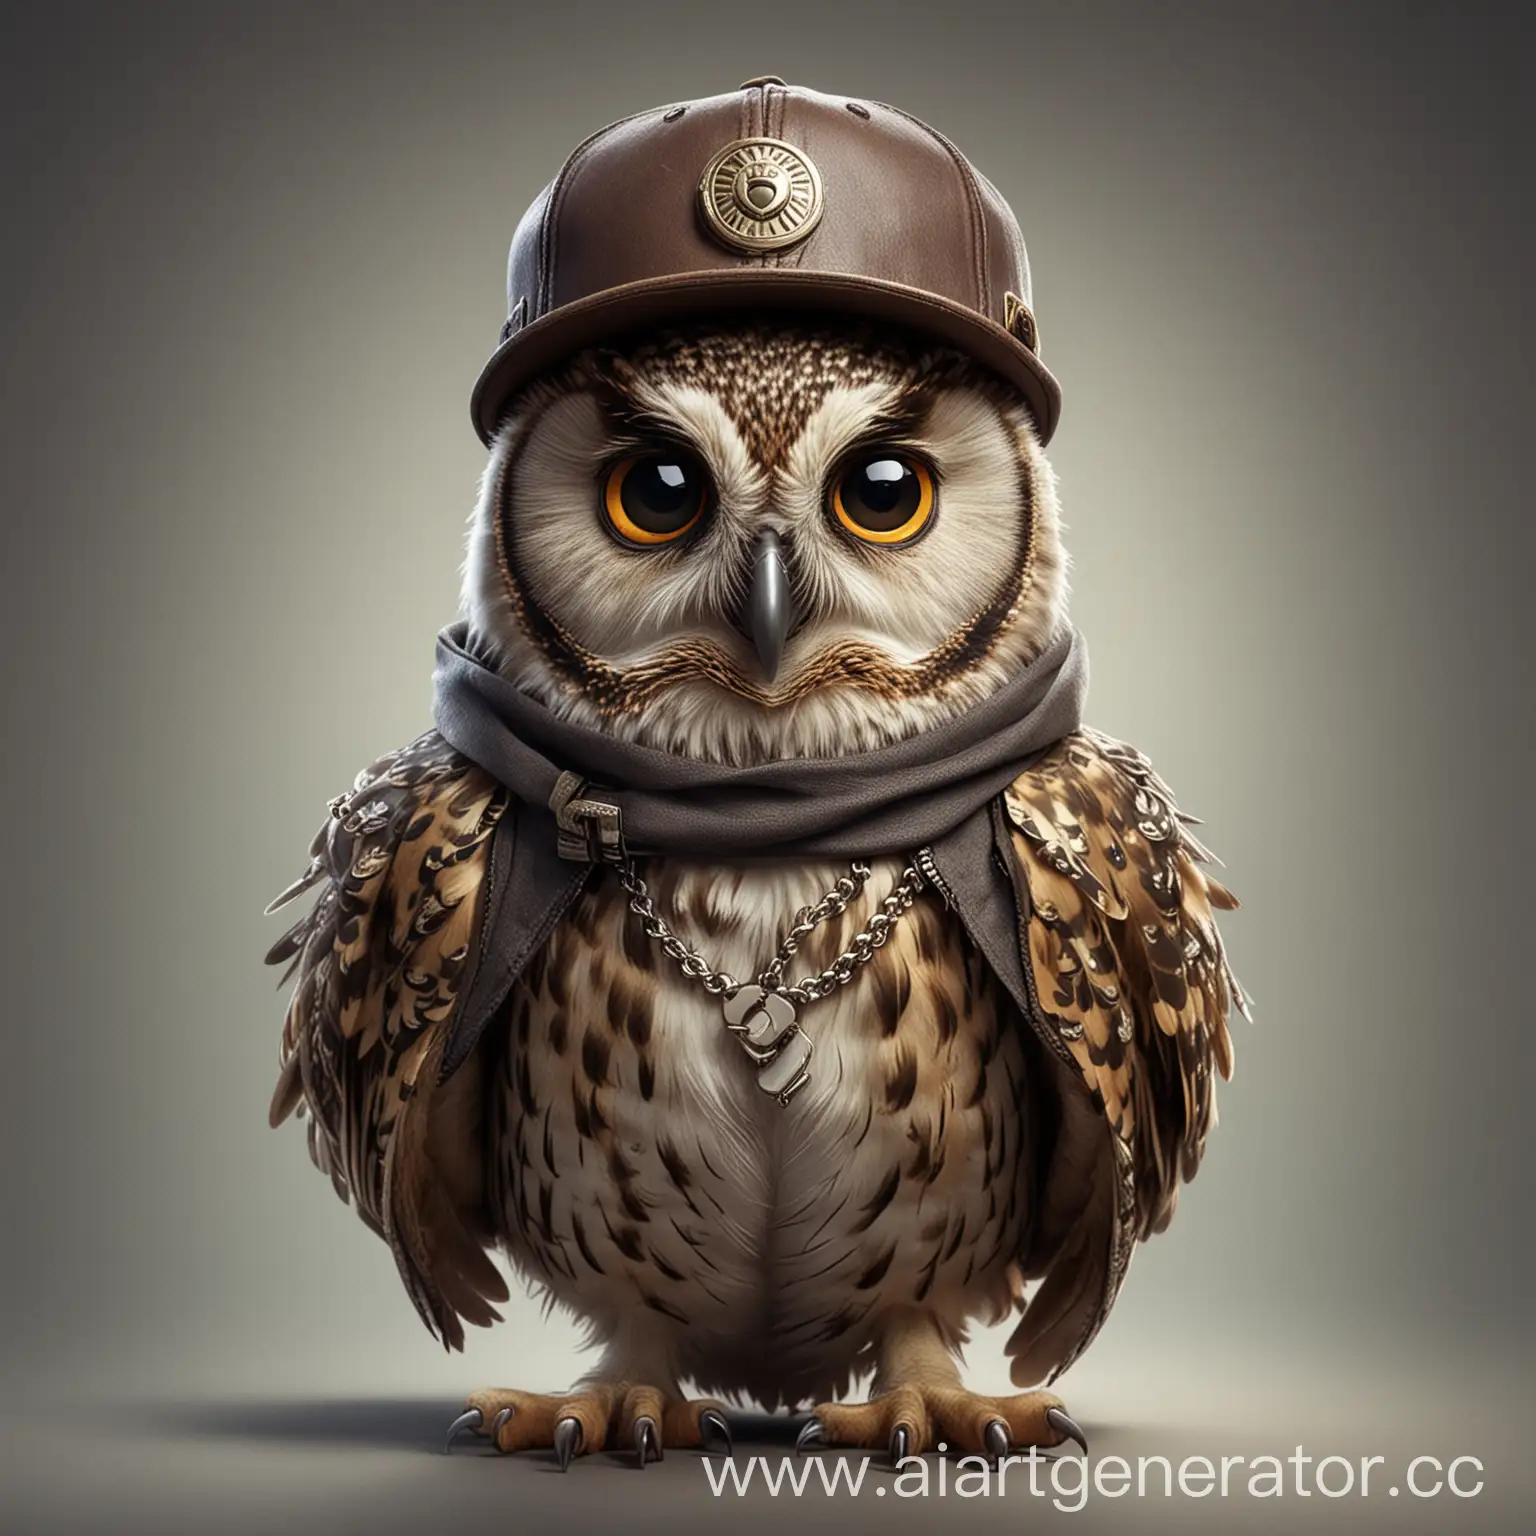 HipHop-Owl-Cool-Bird-Rapper-with-Shades-and-Bling